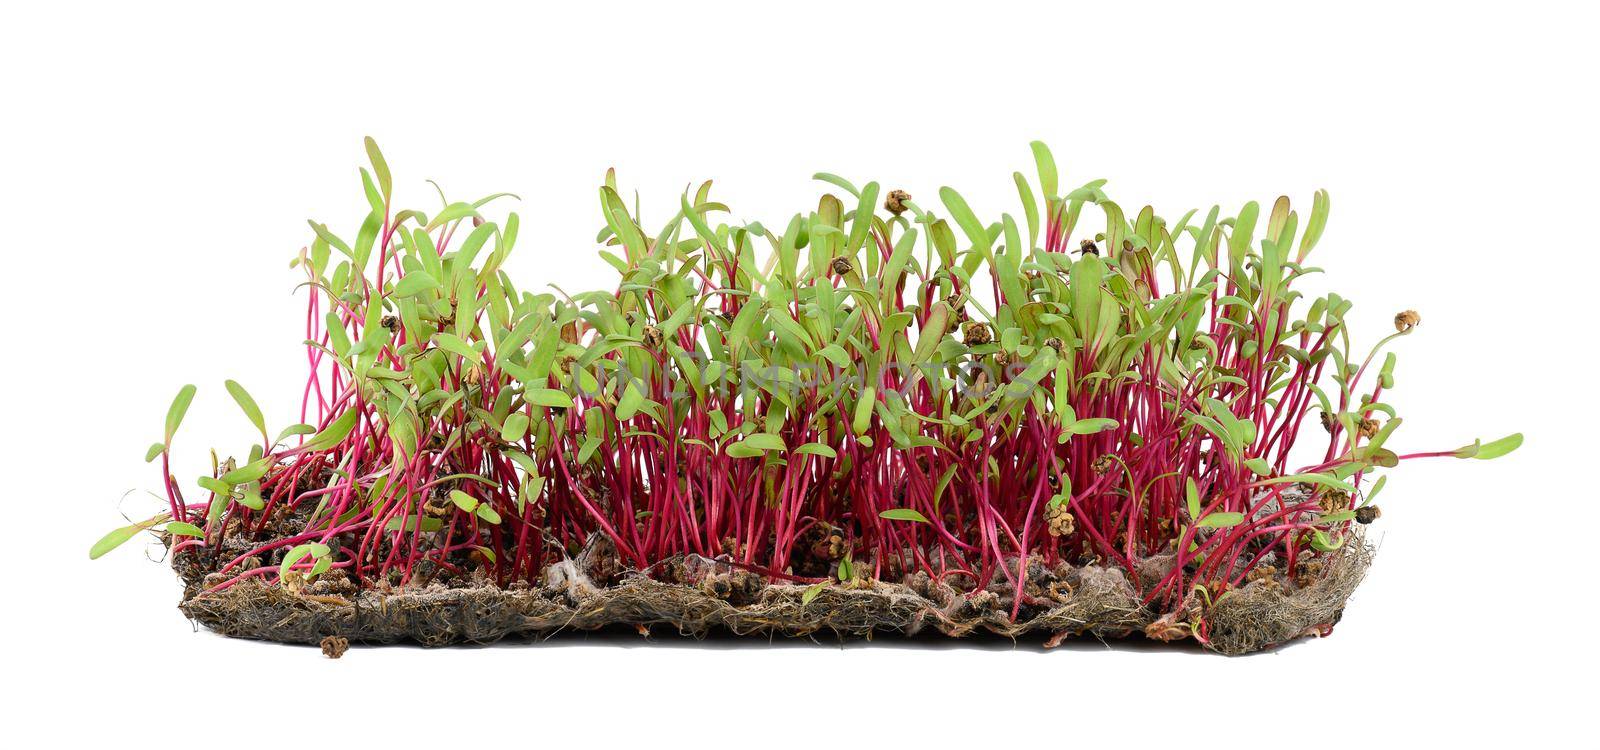 Red beetroot, fresh sprouts and young leaves front view on a white background. Vegetable, herbal and microgreen. by ndanko